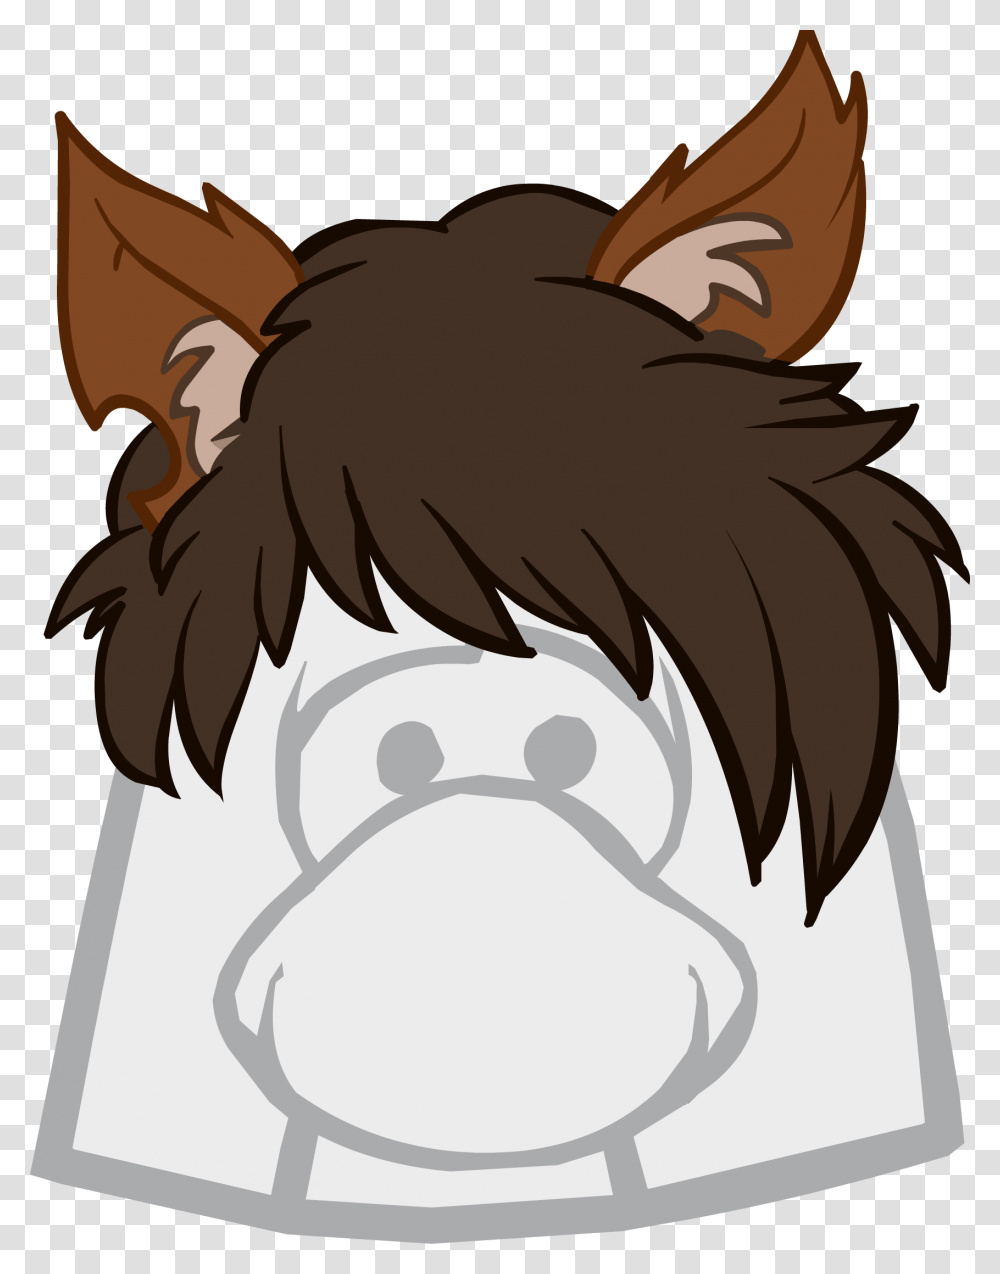 Wolf Ears Club Penguin Optic Headset, Eagle, Bird, Animal, Painting Transparent Png